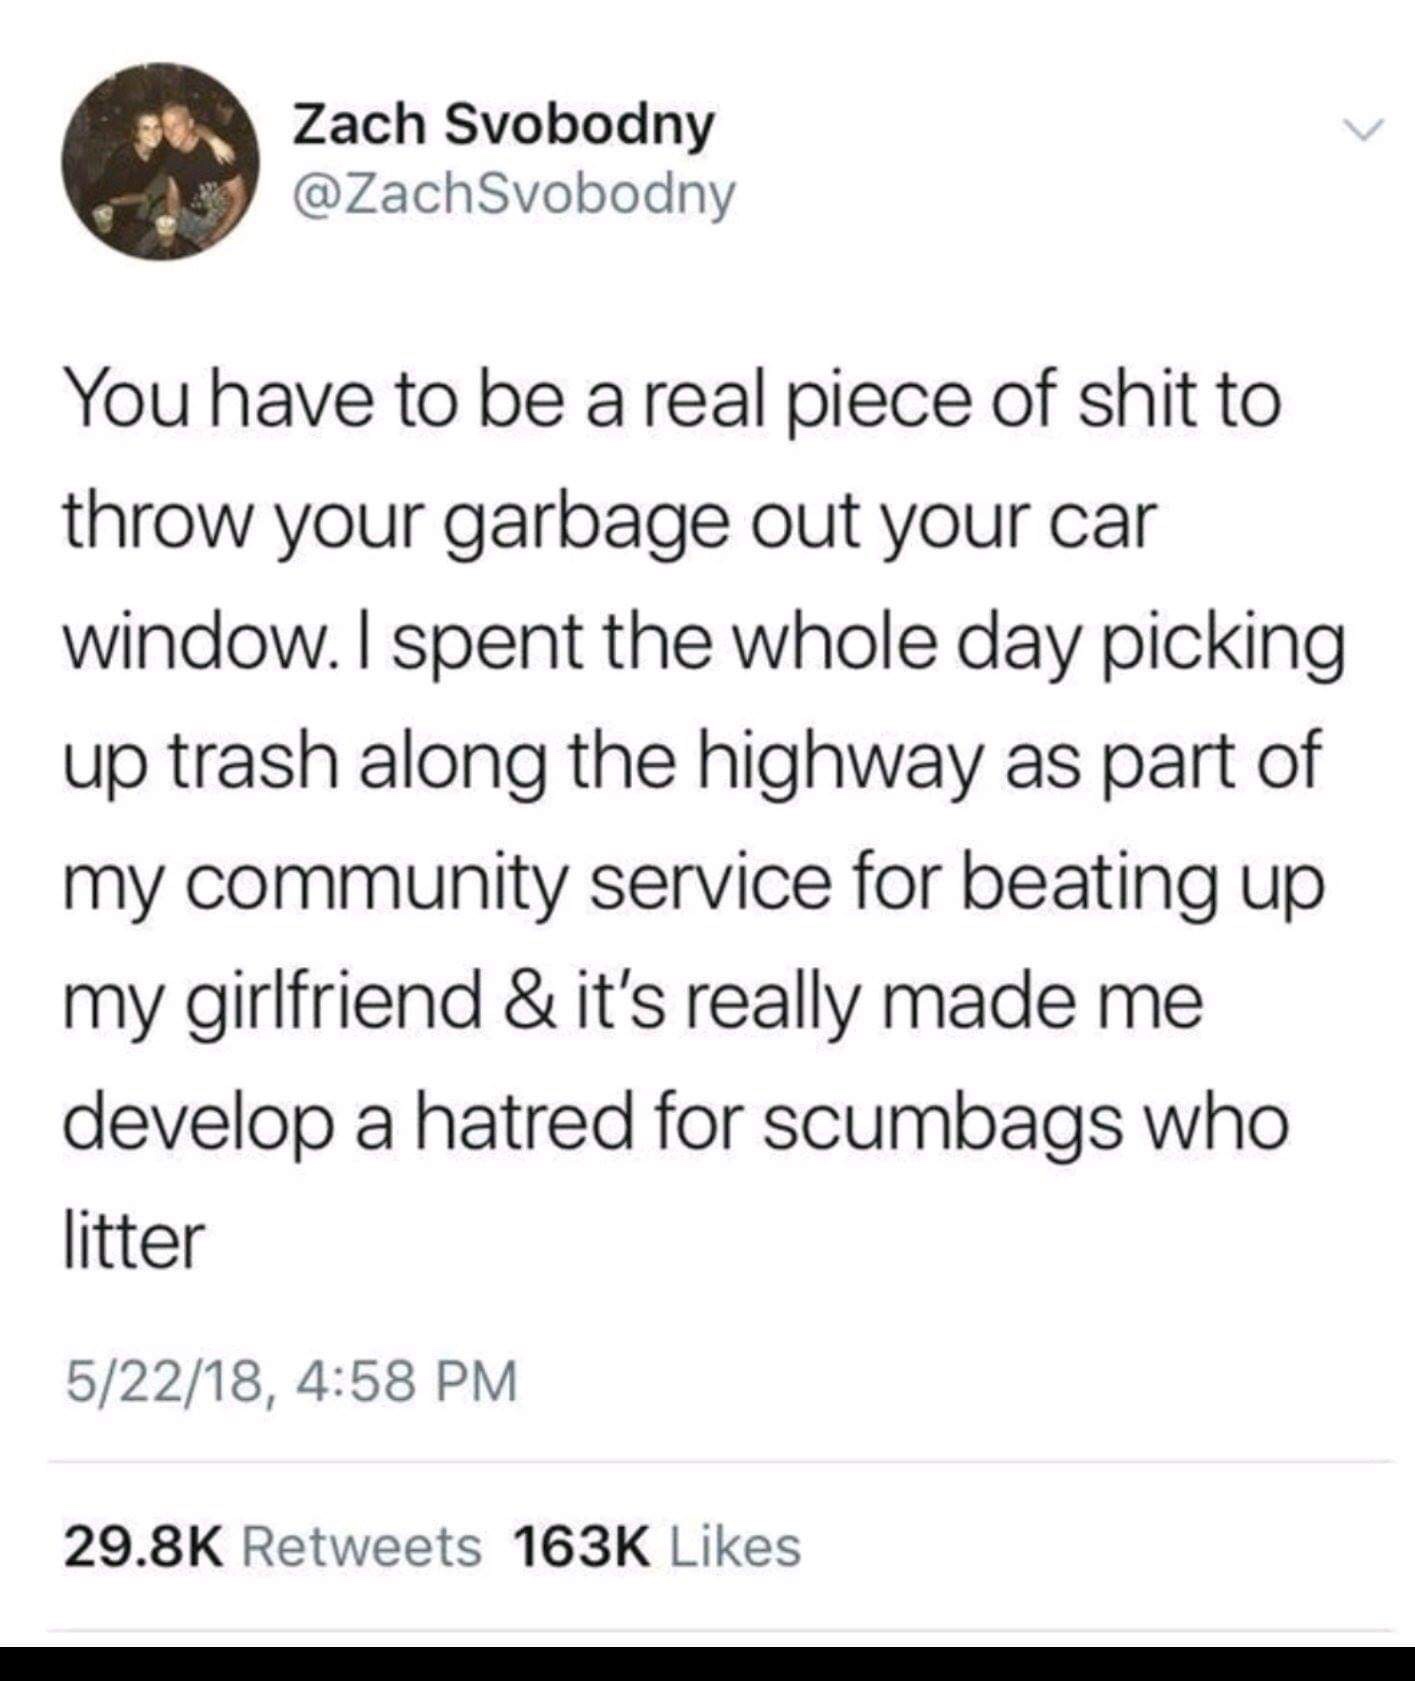 meme - angle - Zach Svobodny You have to be a real piece of shit to throw your garbage out your car window. I spent the whole day picking up trash along the highway as part of my community service for beating up my girlfriend & it's really made me develop